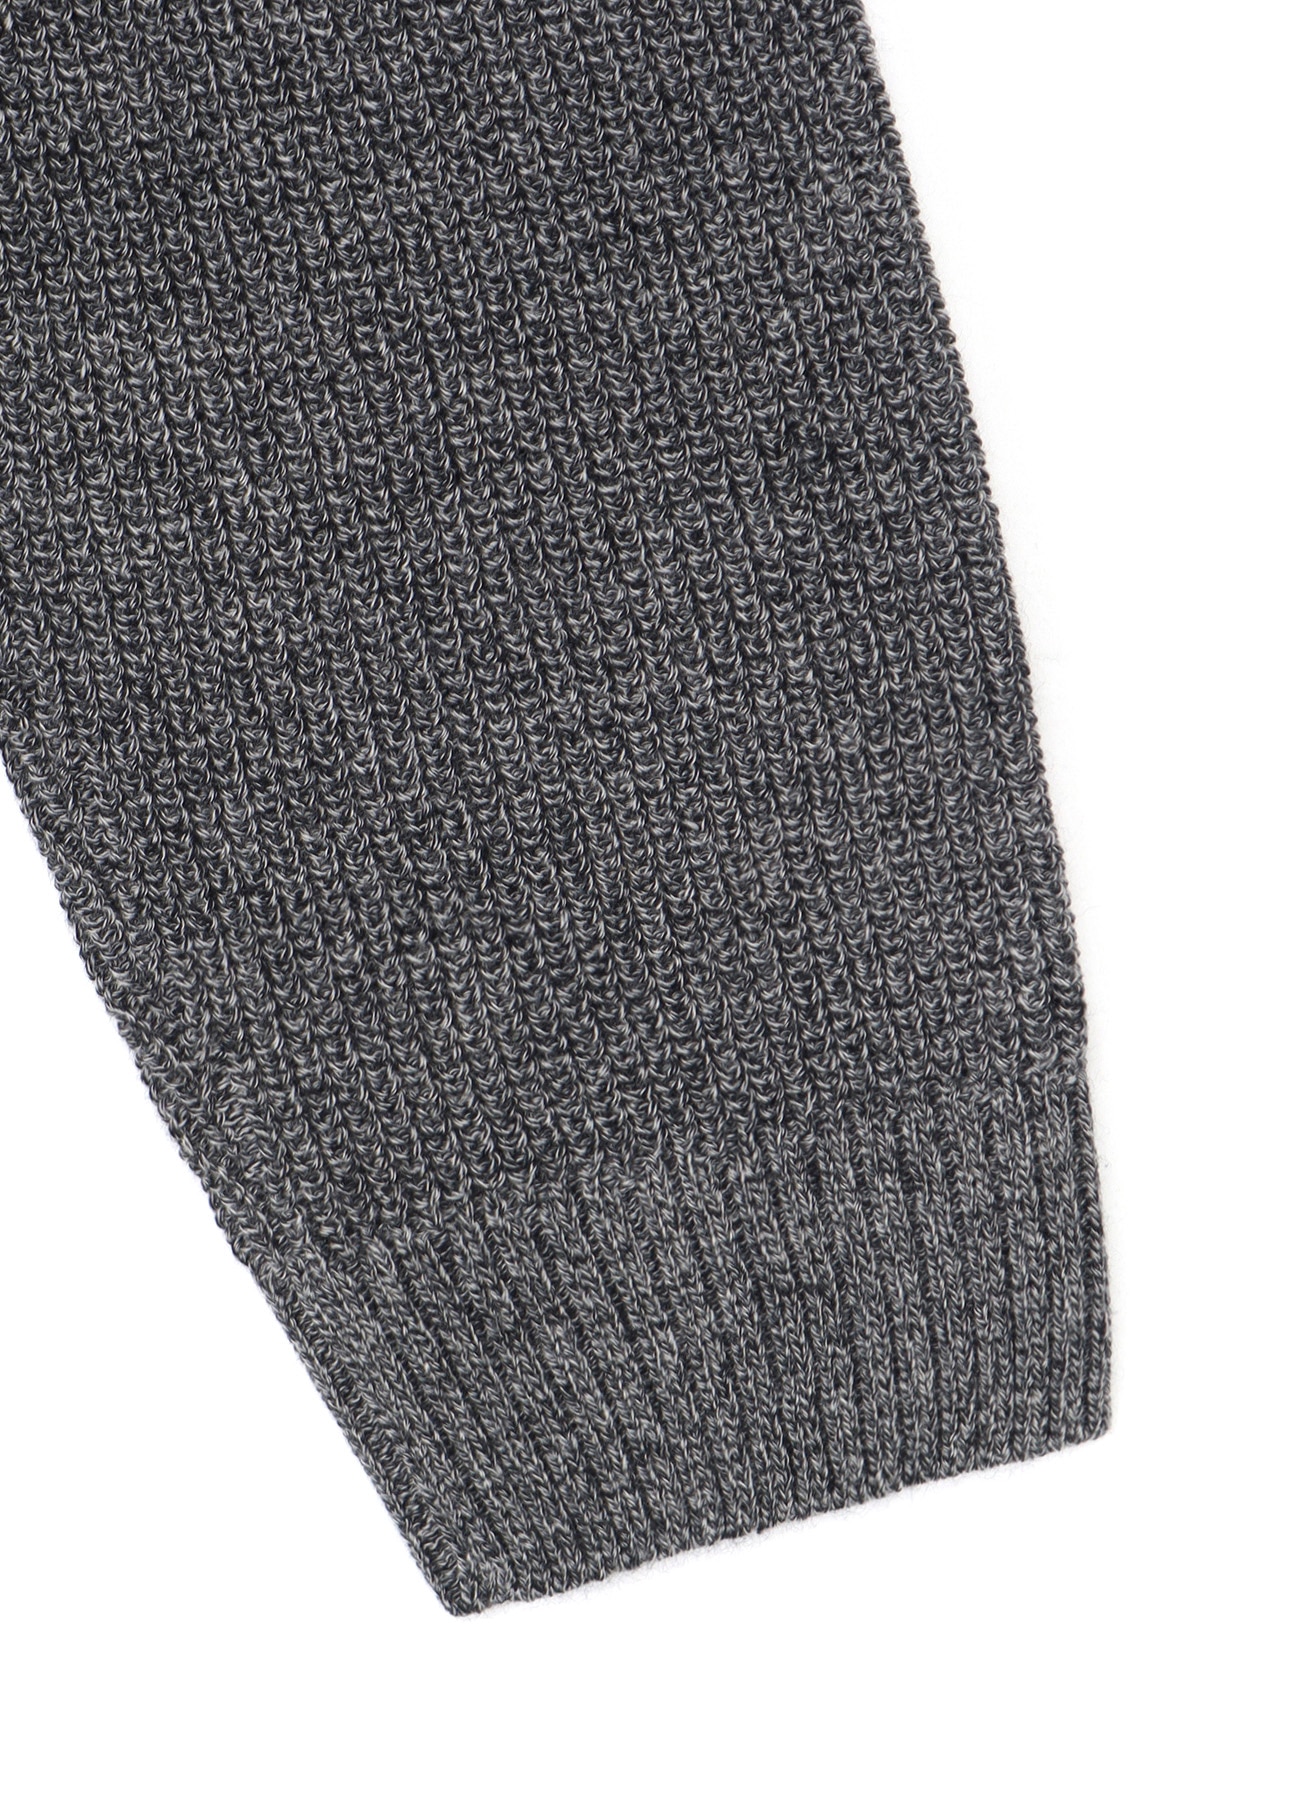 ROUND NECK KNIT WITH Y's for men LOGO PRINT(M GREY): Y's for men